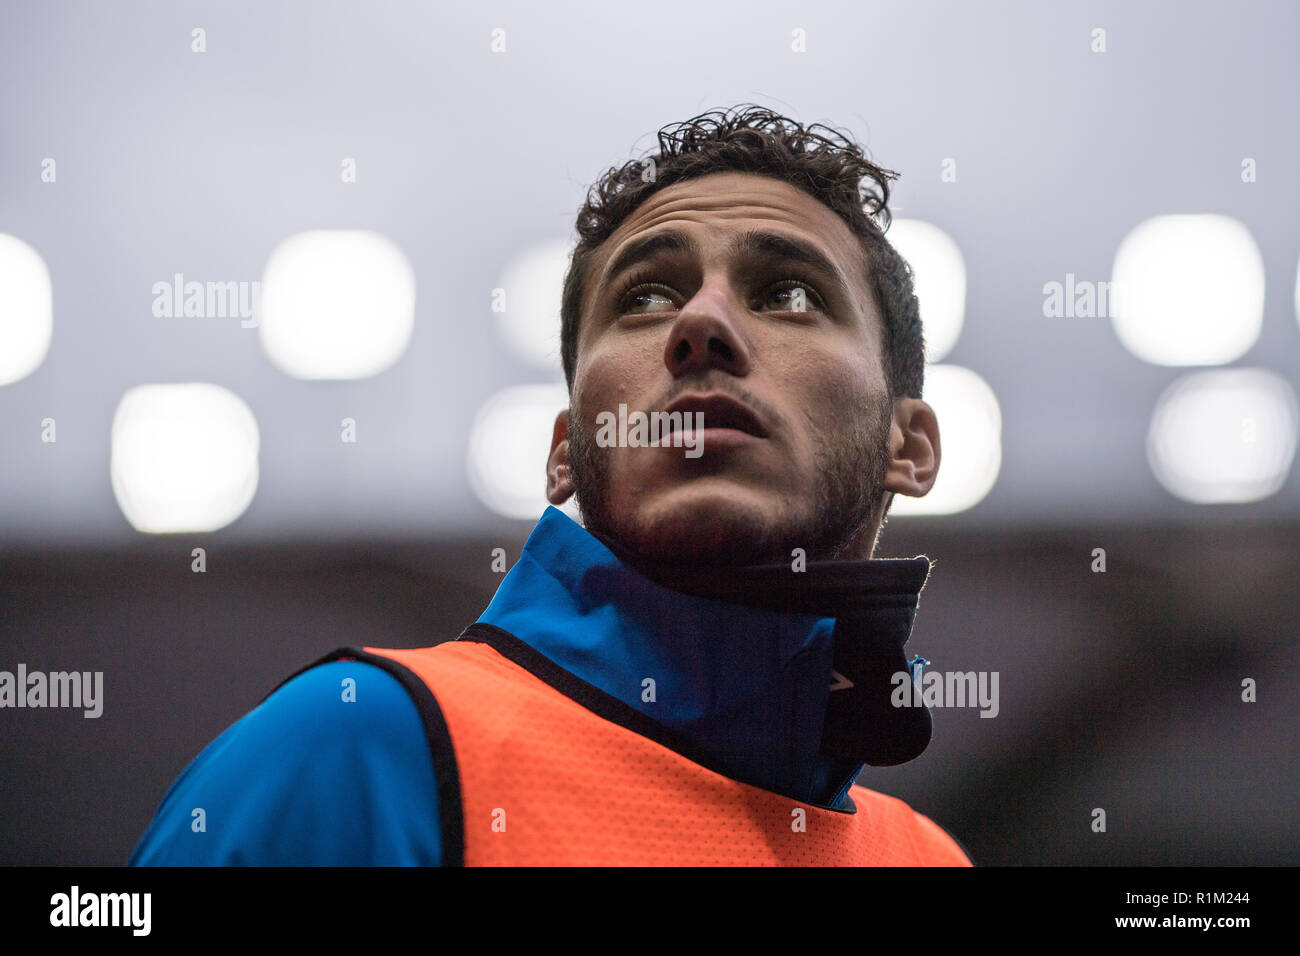 WATFORD, ENGLAND - OCTOBER 27: Ramadan Sobhi of Huddersfield Town  looks on while warms up during the Premier League match between Watford FC and Huddersfield Town at Vicarage Road on October 27, 2018 in Watford, United Kingdom. (MB Media) Stock Photo